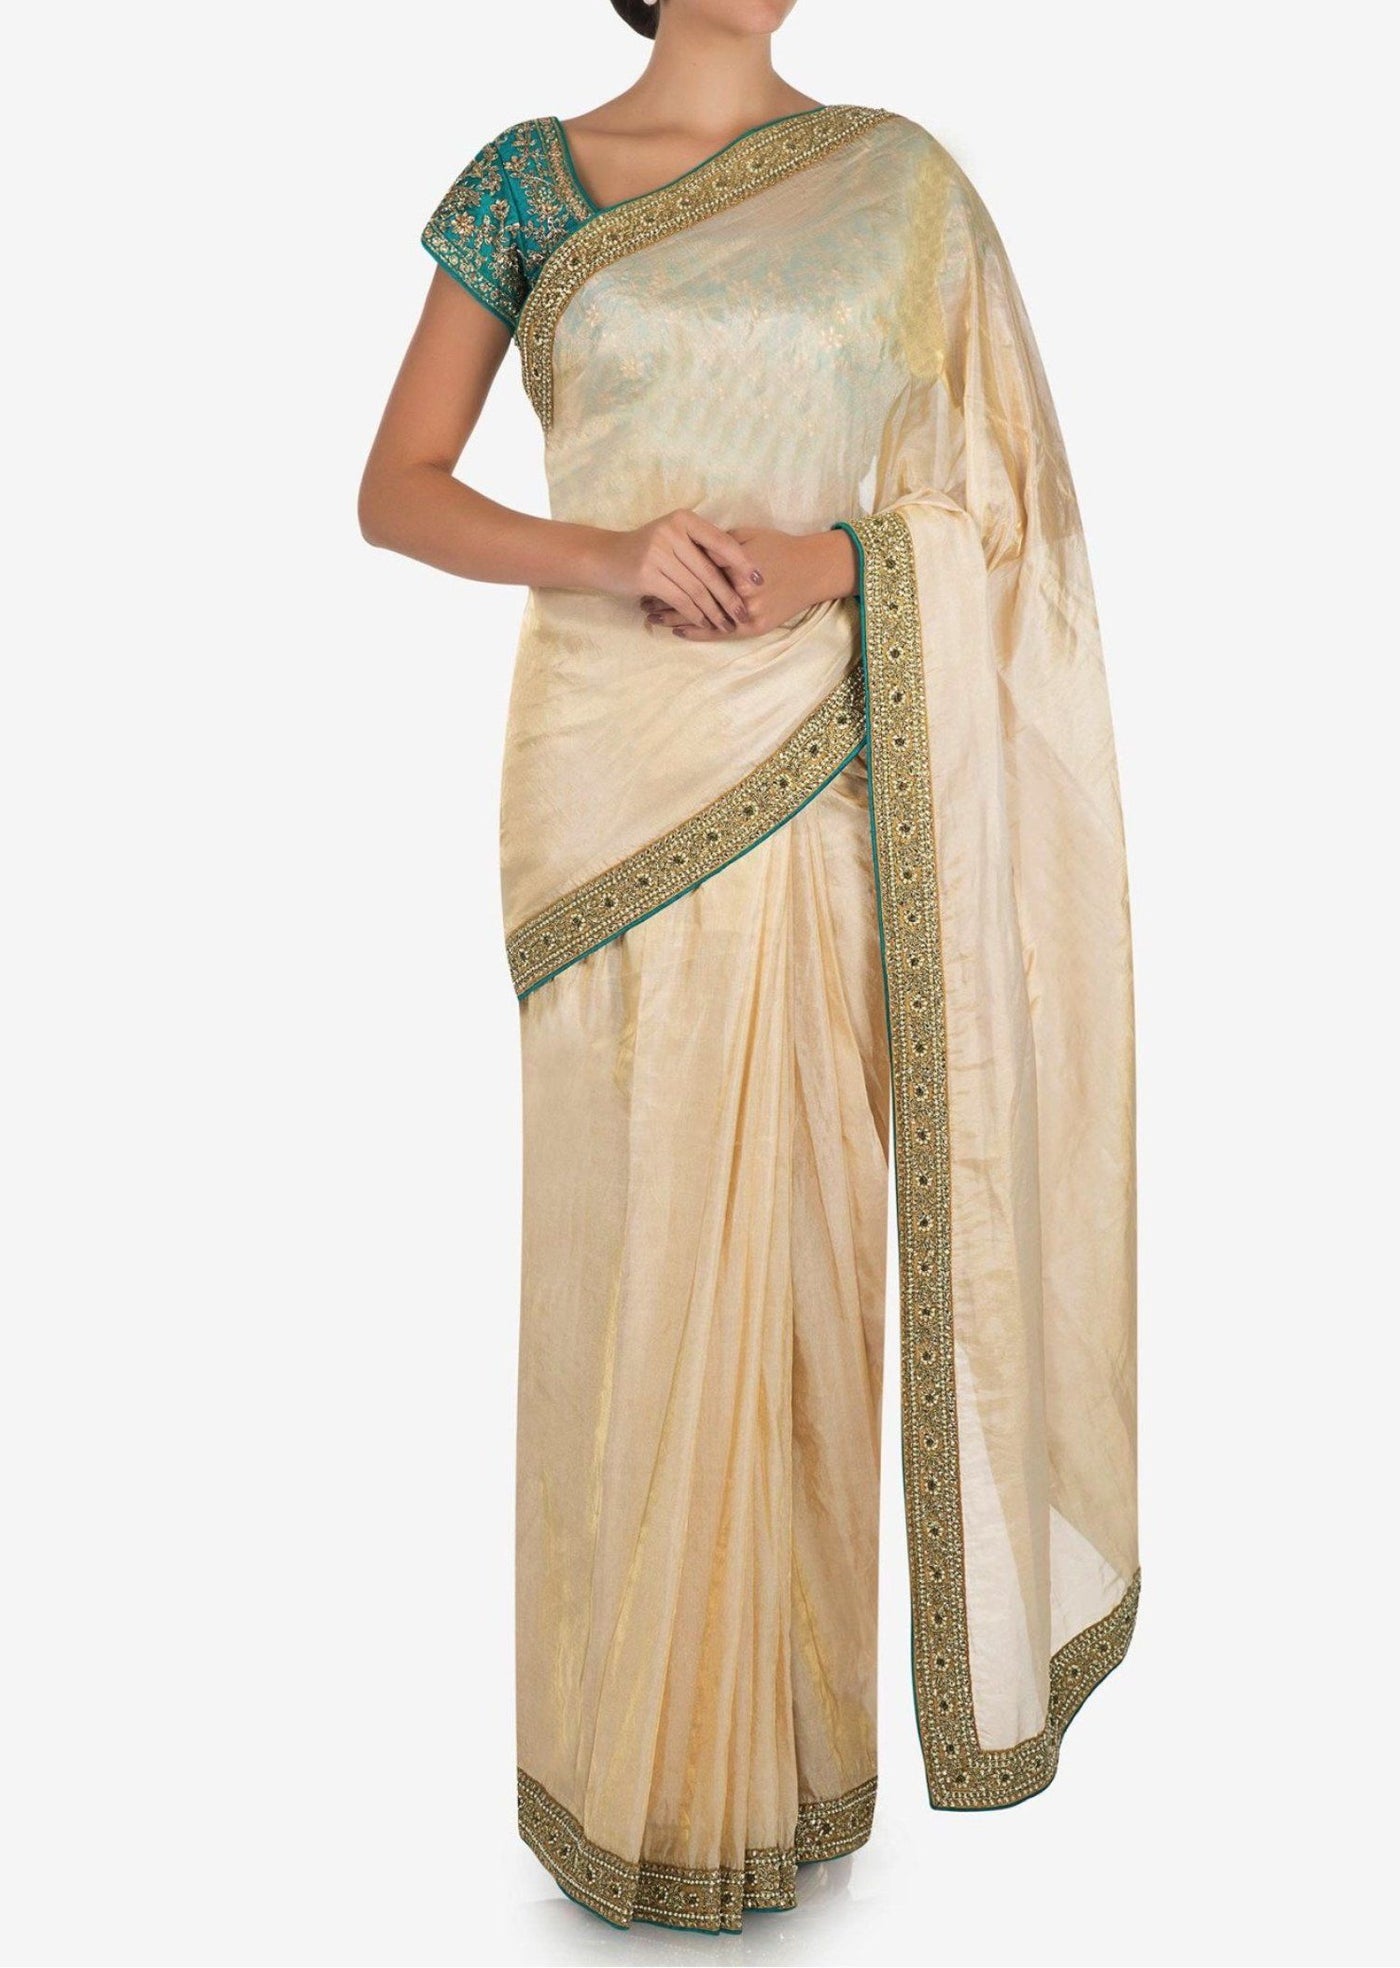 Cream saree with dark green blouse - Indian Clothing in Denver, CO, Aurora, CO, Boulder, CO, Fort Collins, CO, Colorado Springs, CO, Parker, CO, Highlands Ranch, CO, Cherry Creek, CO, Centennial, CO, and Longmont, CO. Nationwide shipping USA - India Fashion X